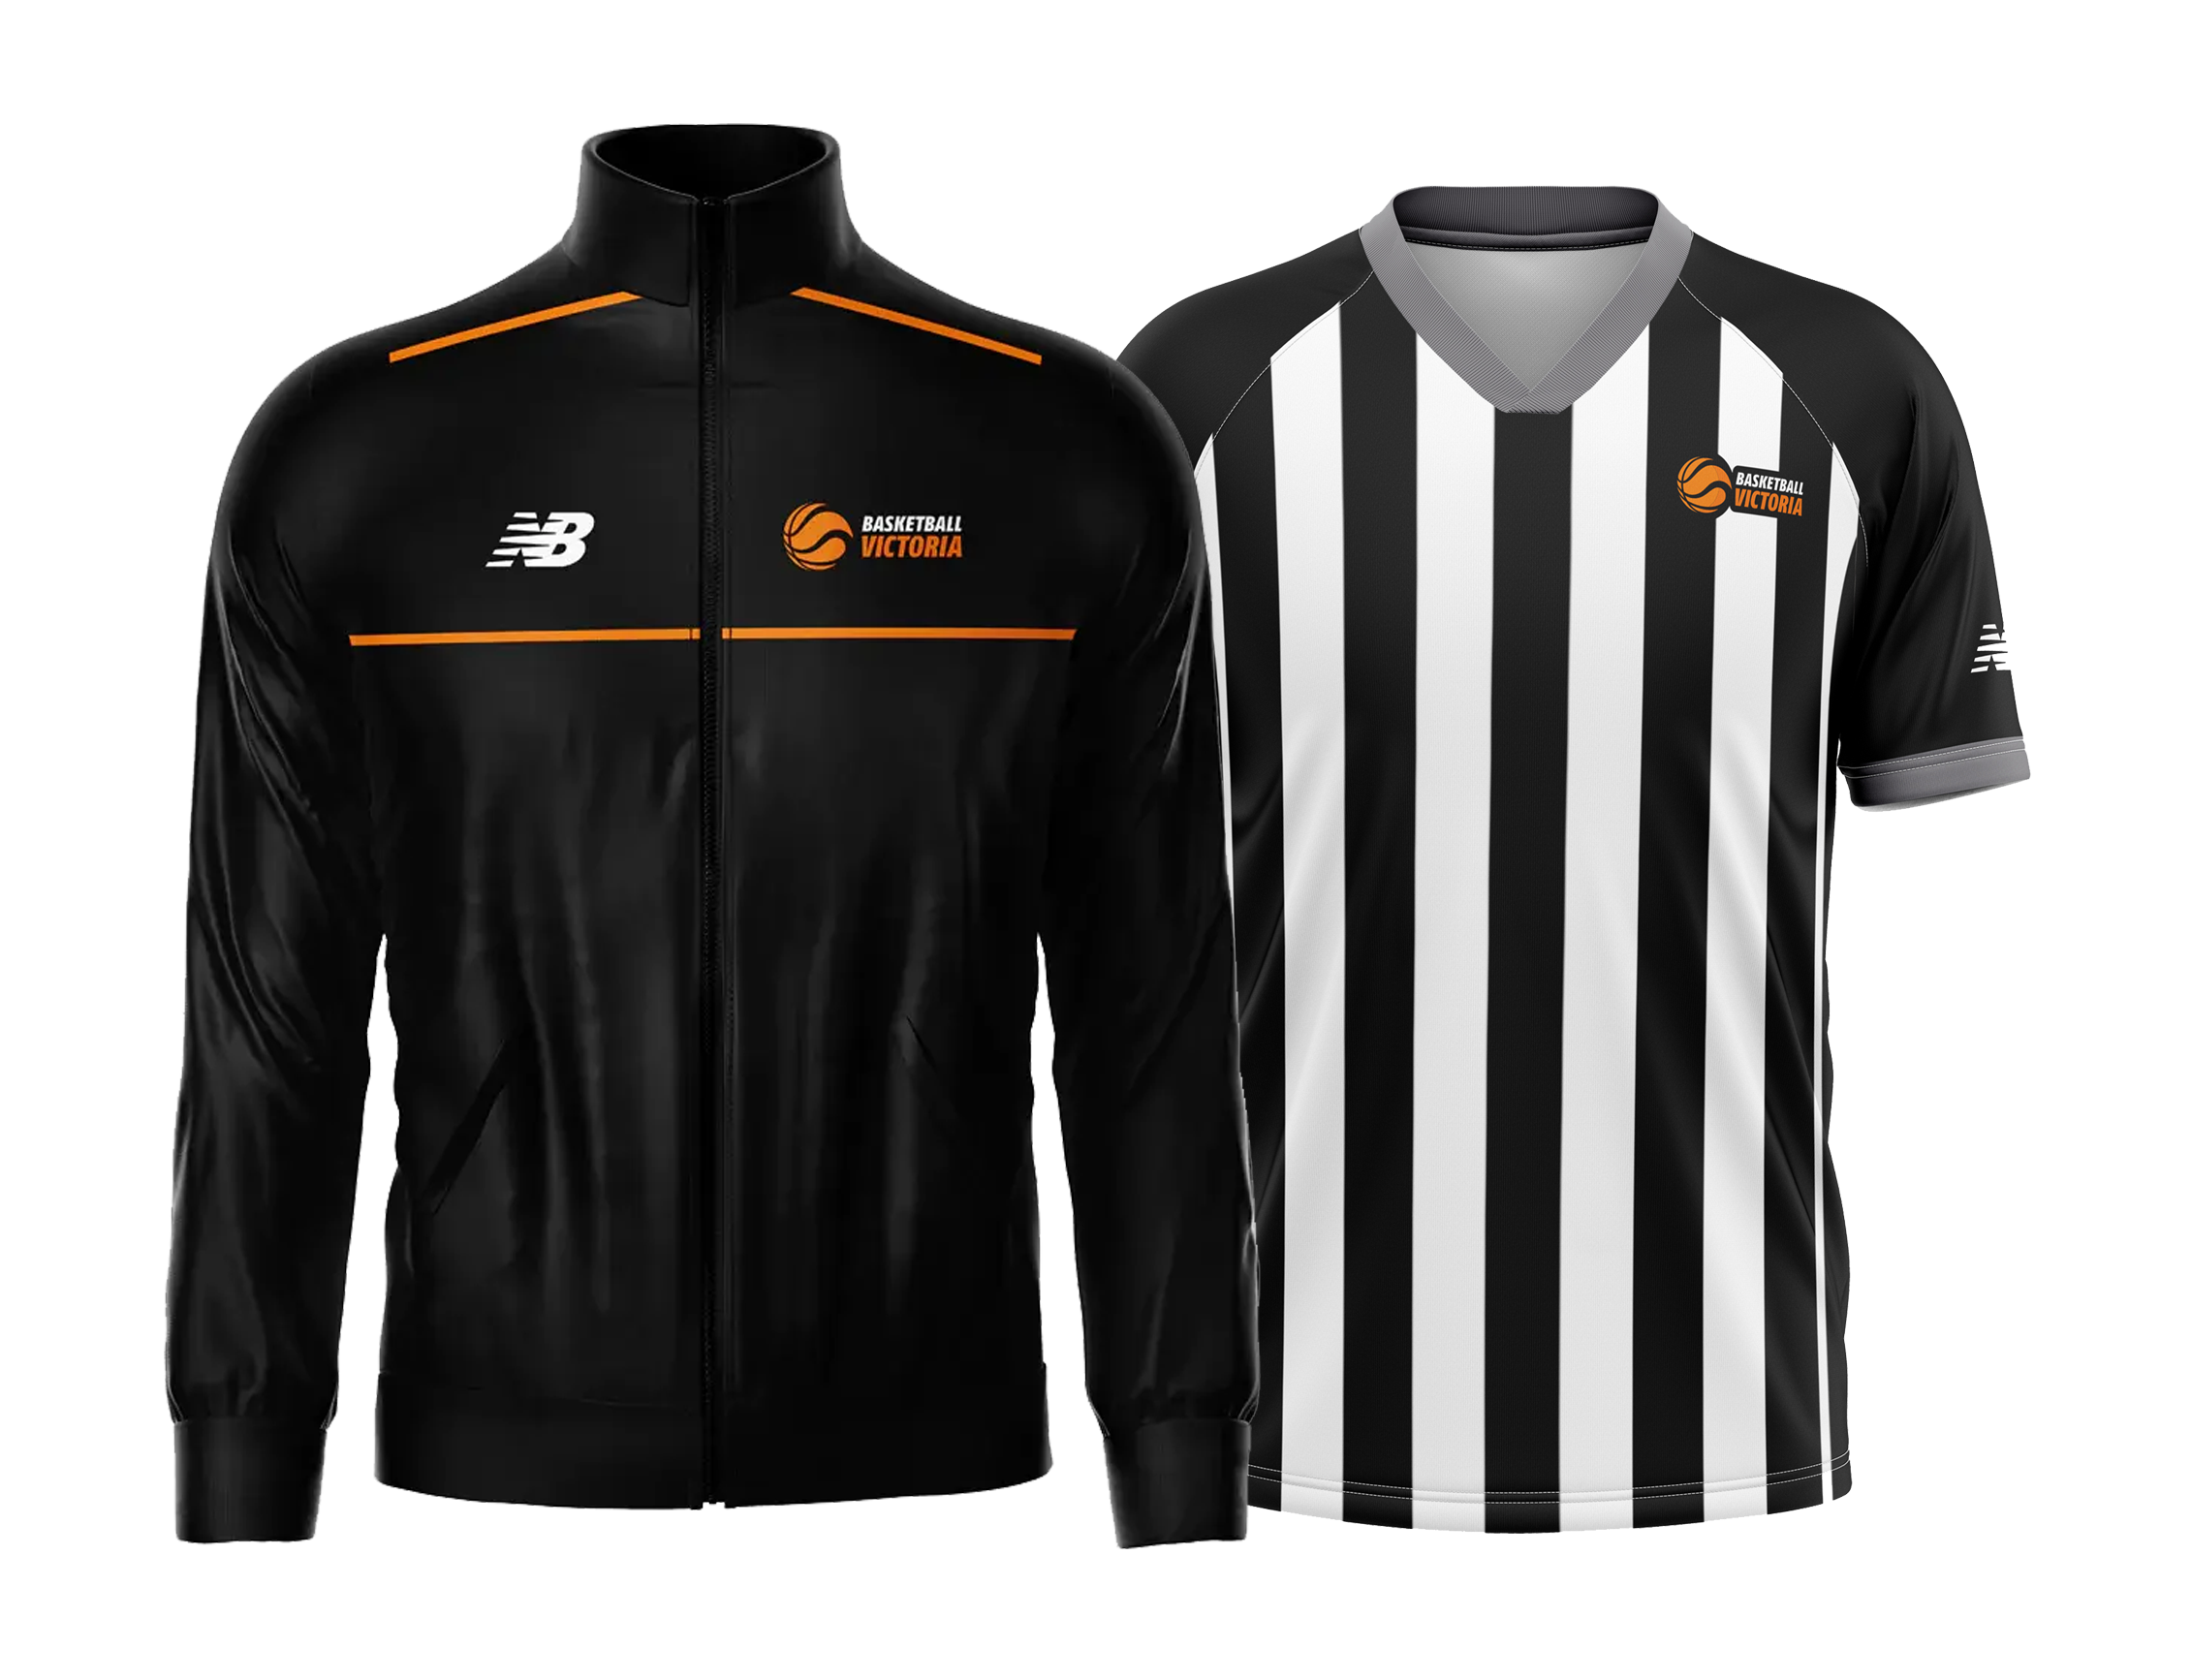 New Technical Officials Clothing Range Partnership 